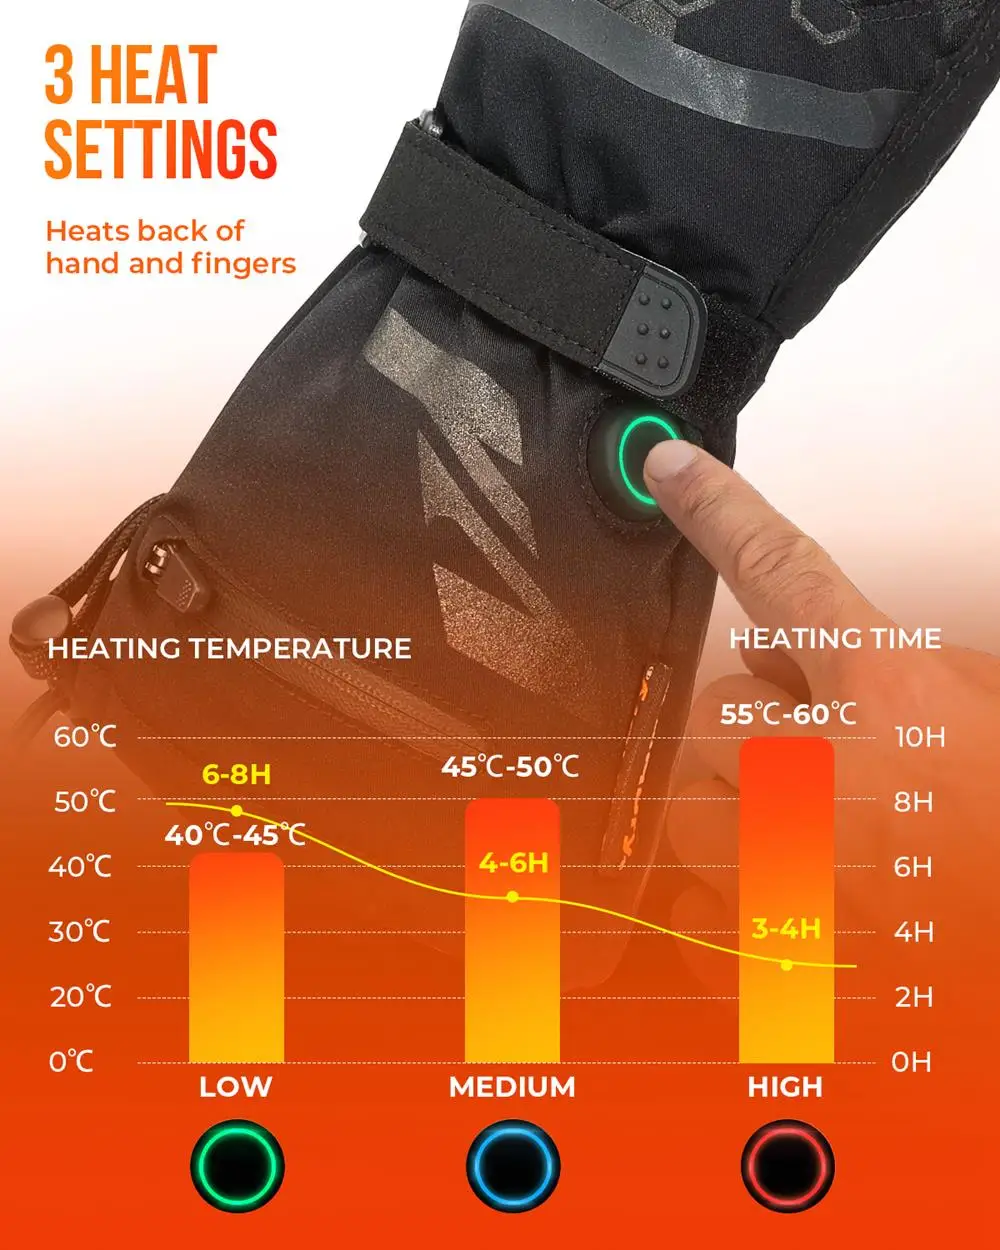 Winter Electric Heated Gloves Windproof Cycling Warm Heating Touch Screen Skiing Gloves USB Powered Heated Gloves For Men Women enlarge